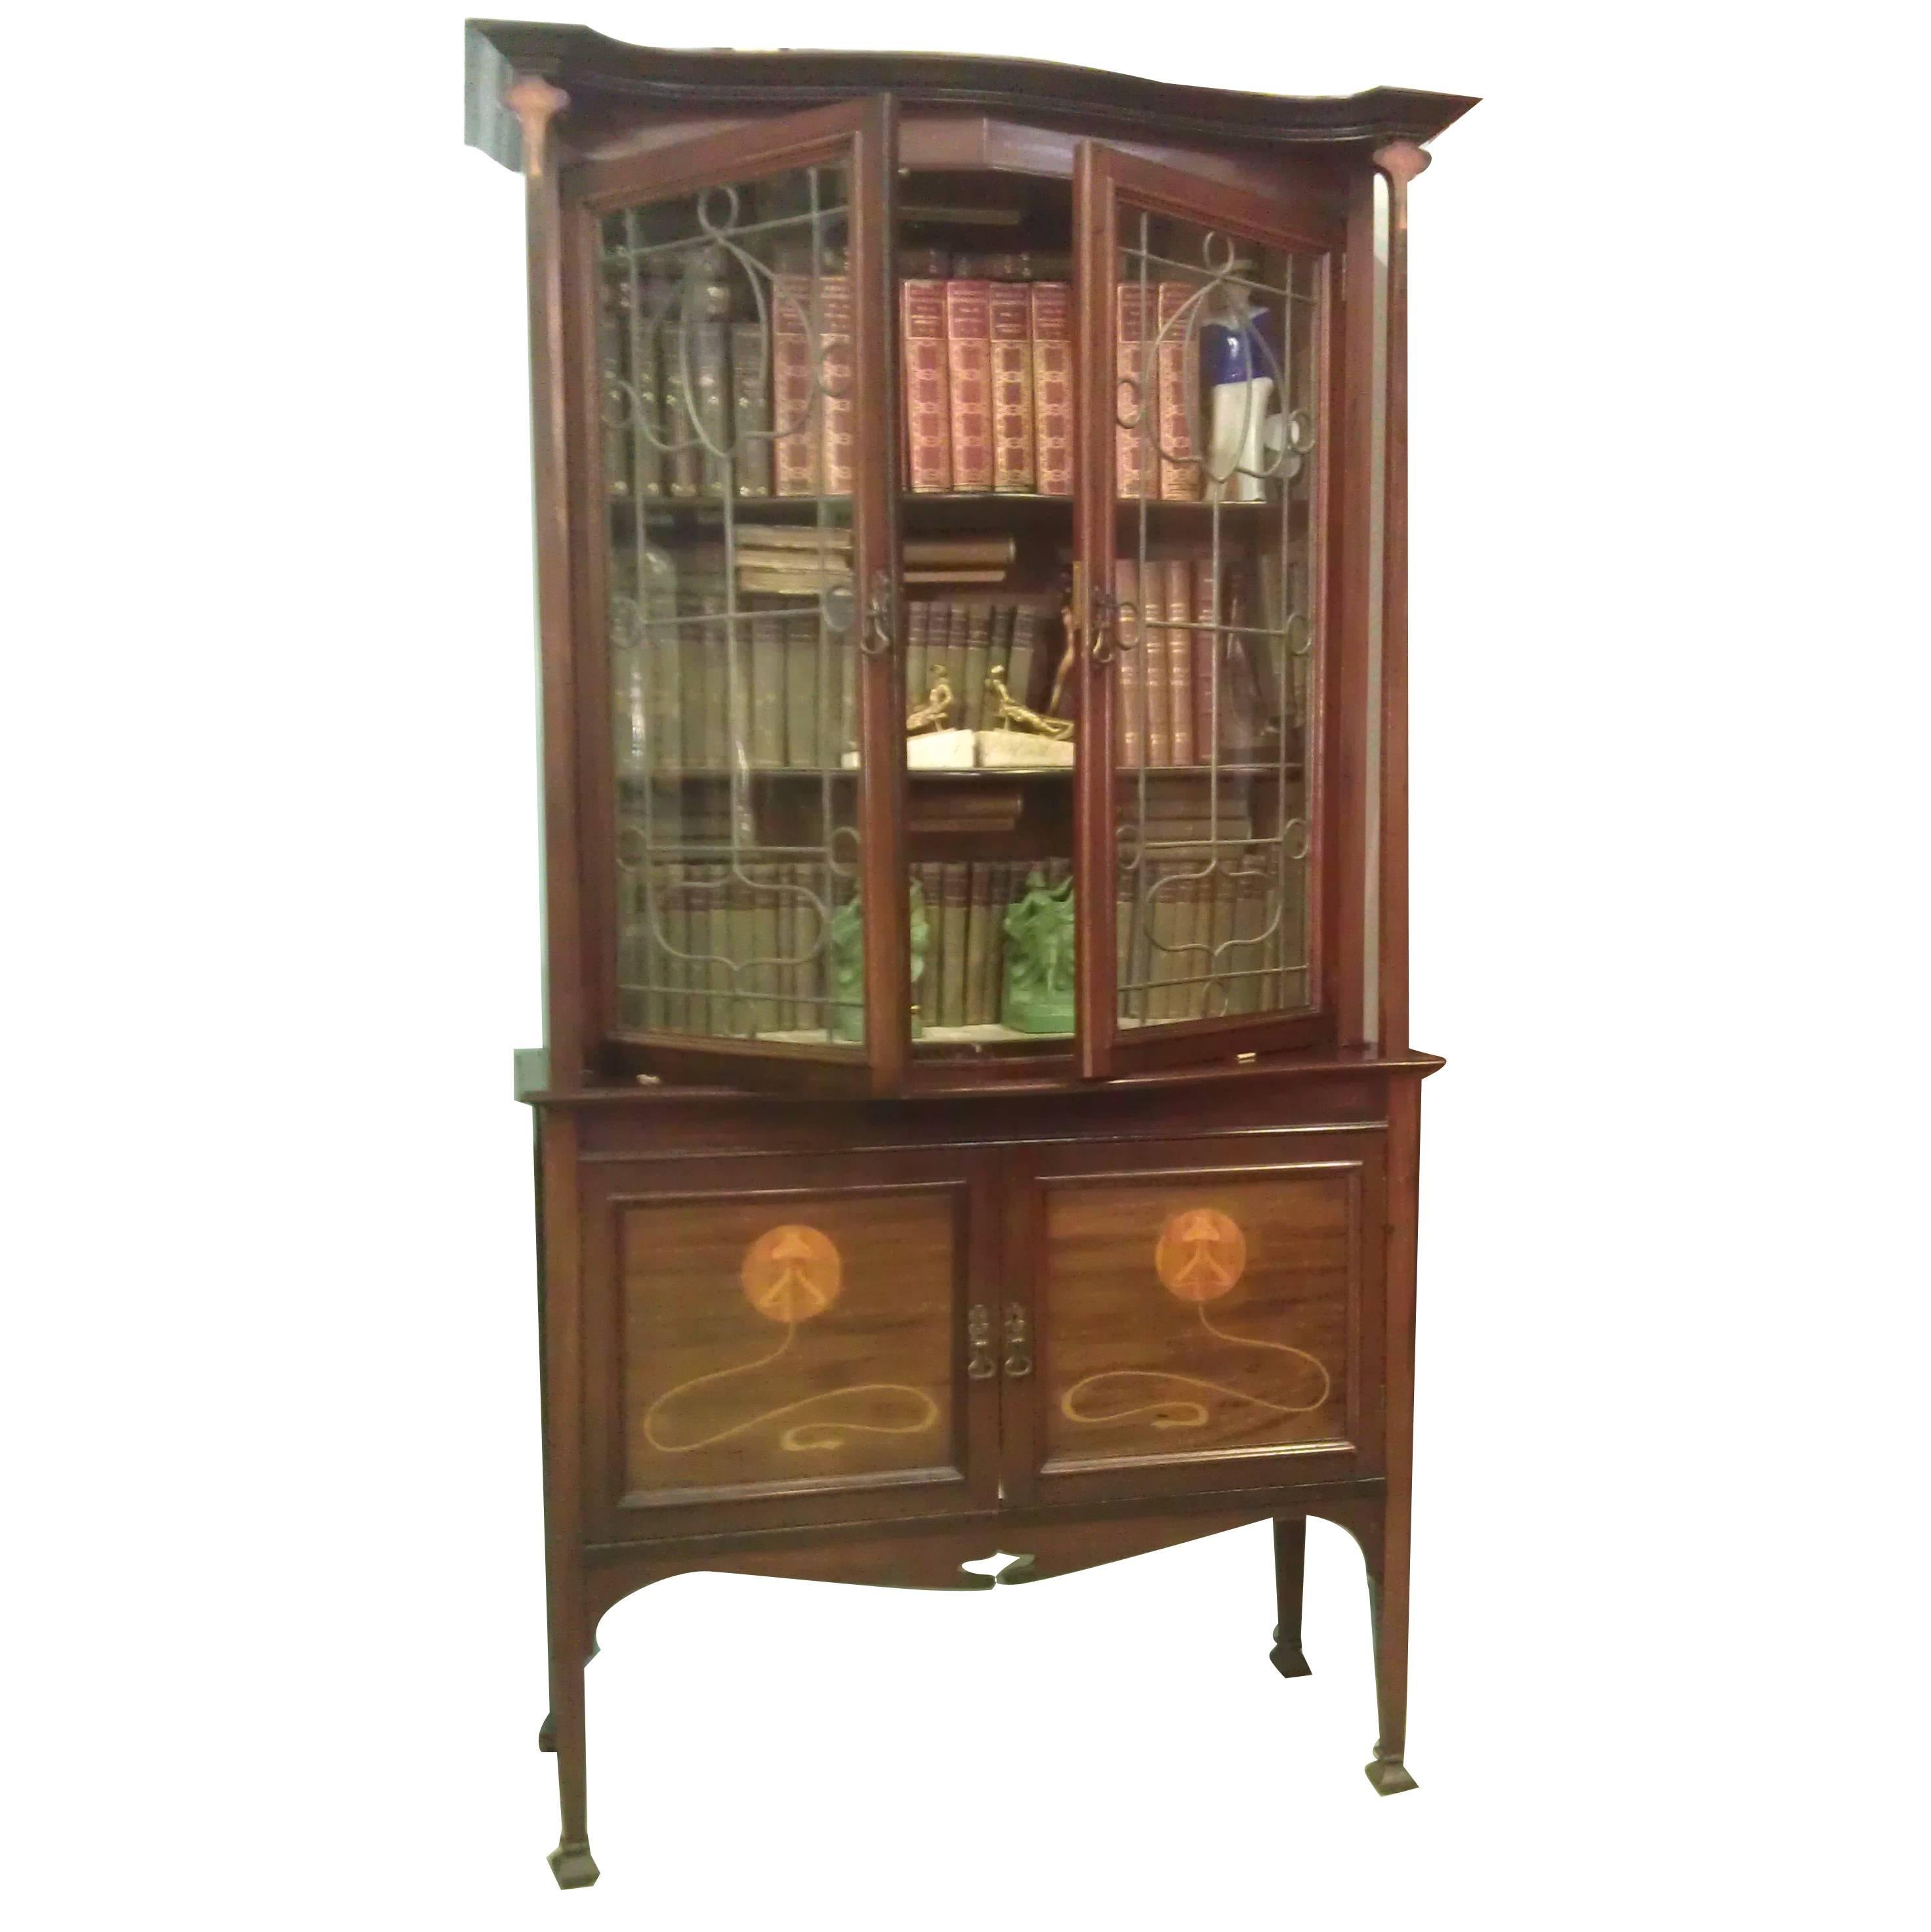 Exquisite Art Nouveau Marquetry Cabinet Iconic Galle Style -Provenance  For Sale